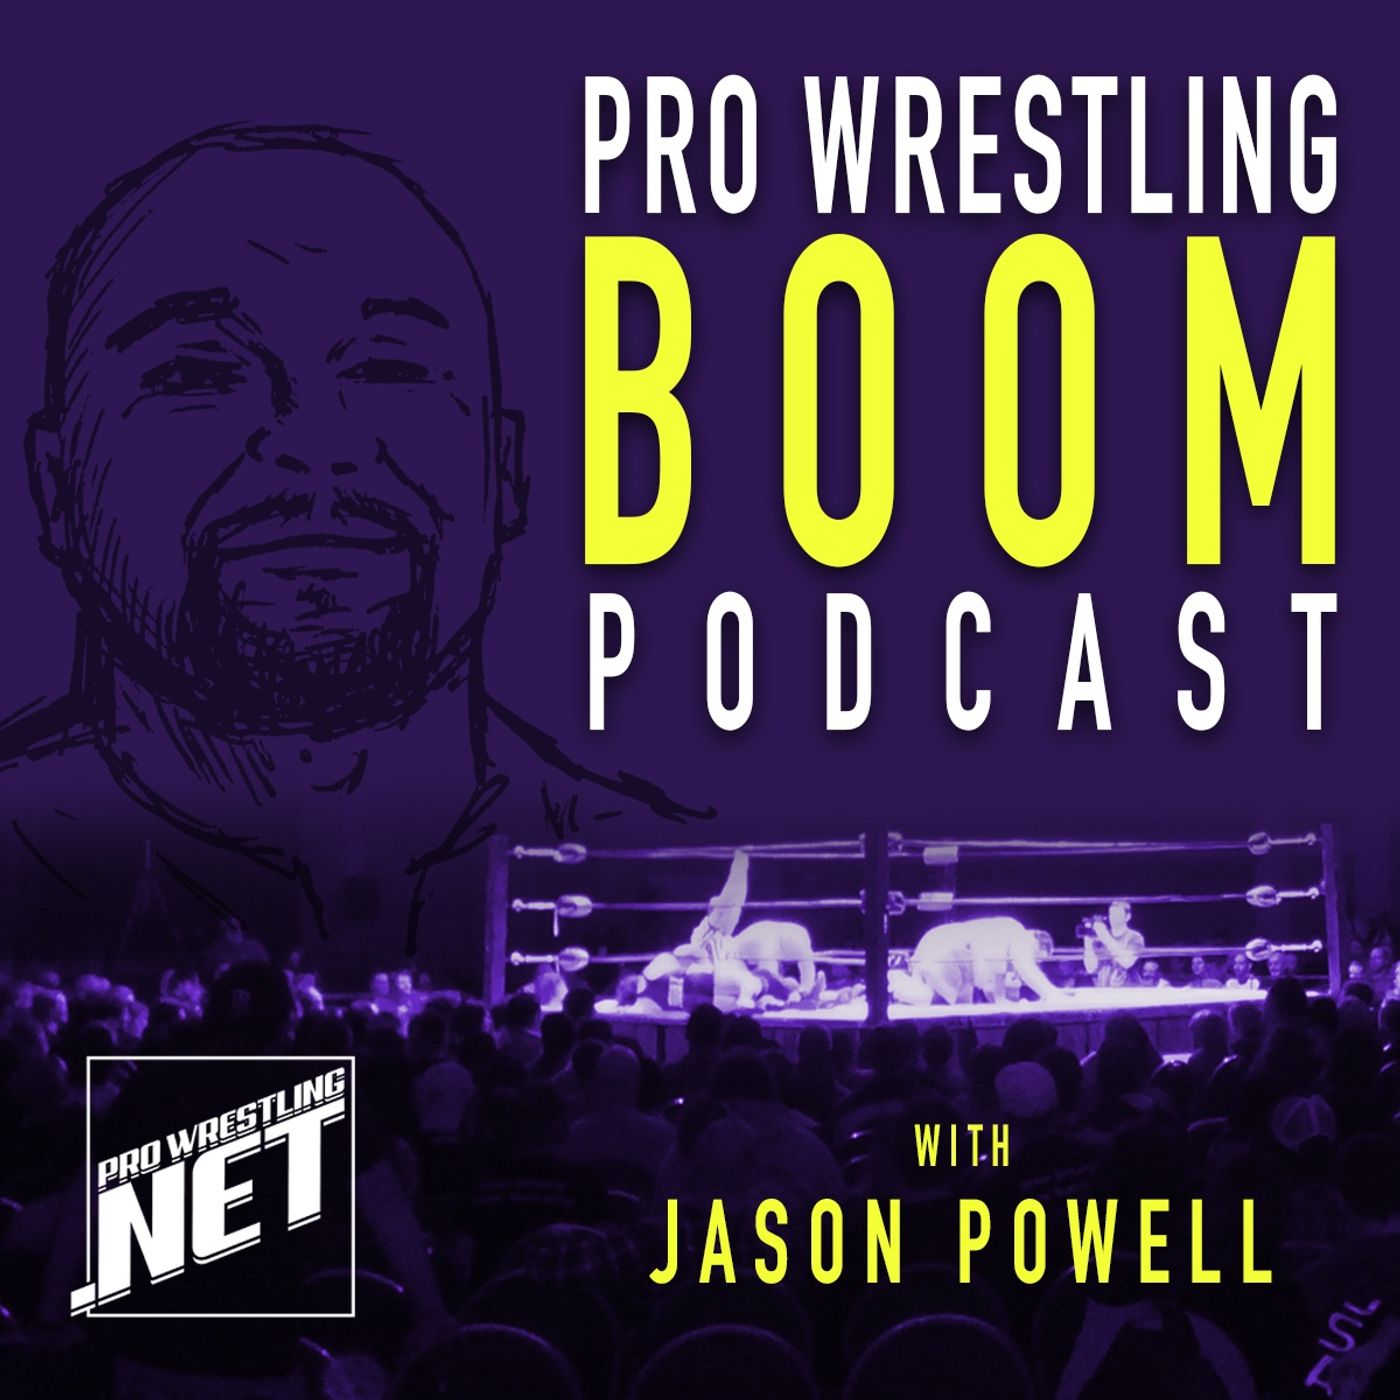 07/29 Pro Wrestling Boom Podcast With Jason Powell (Episode 168): Jonny Fairplay details his first in-person experience at AEW Dynamite